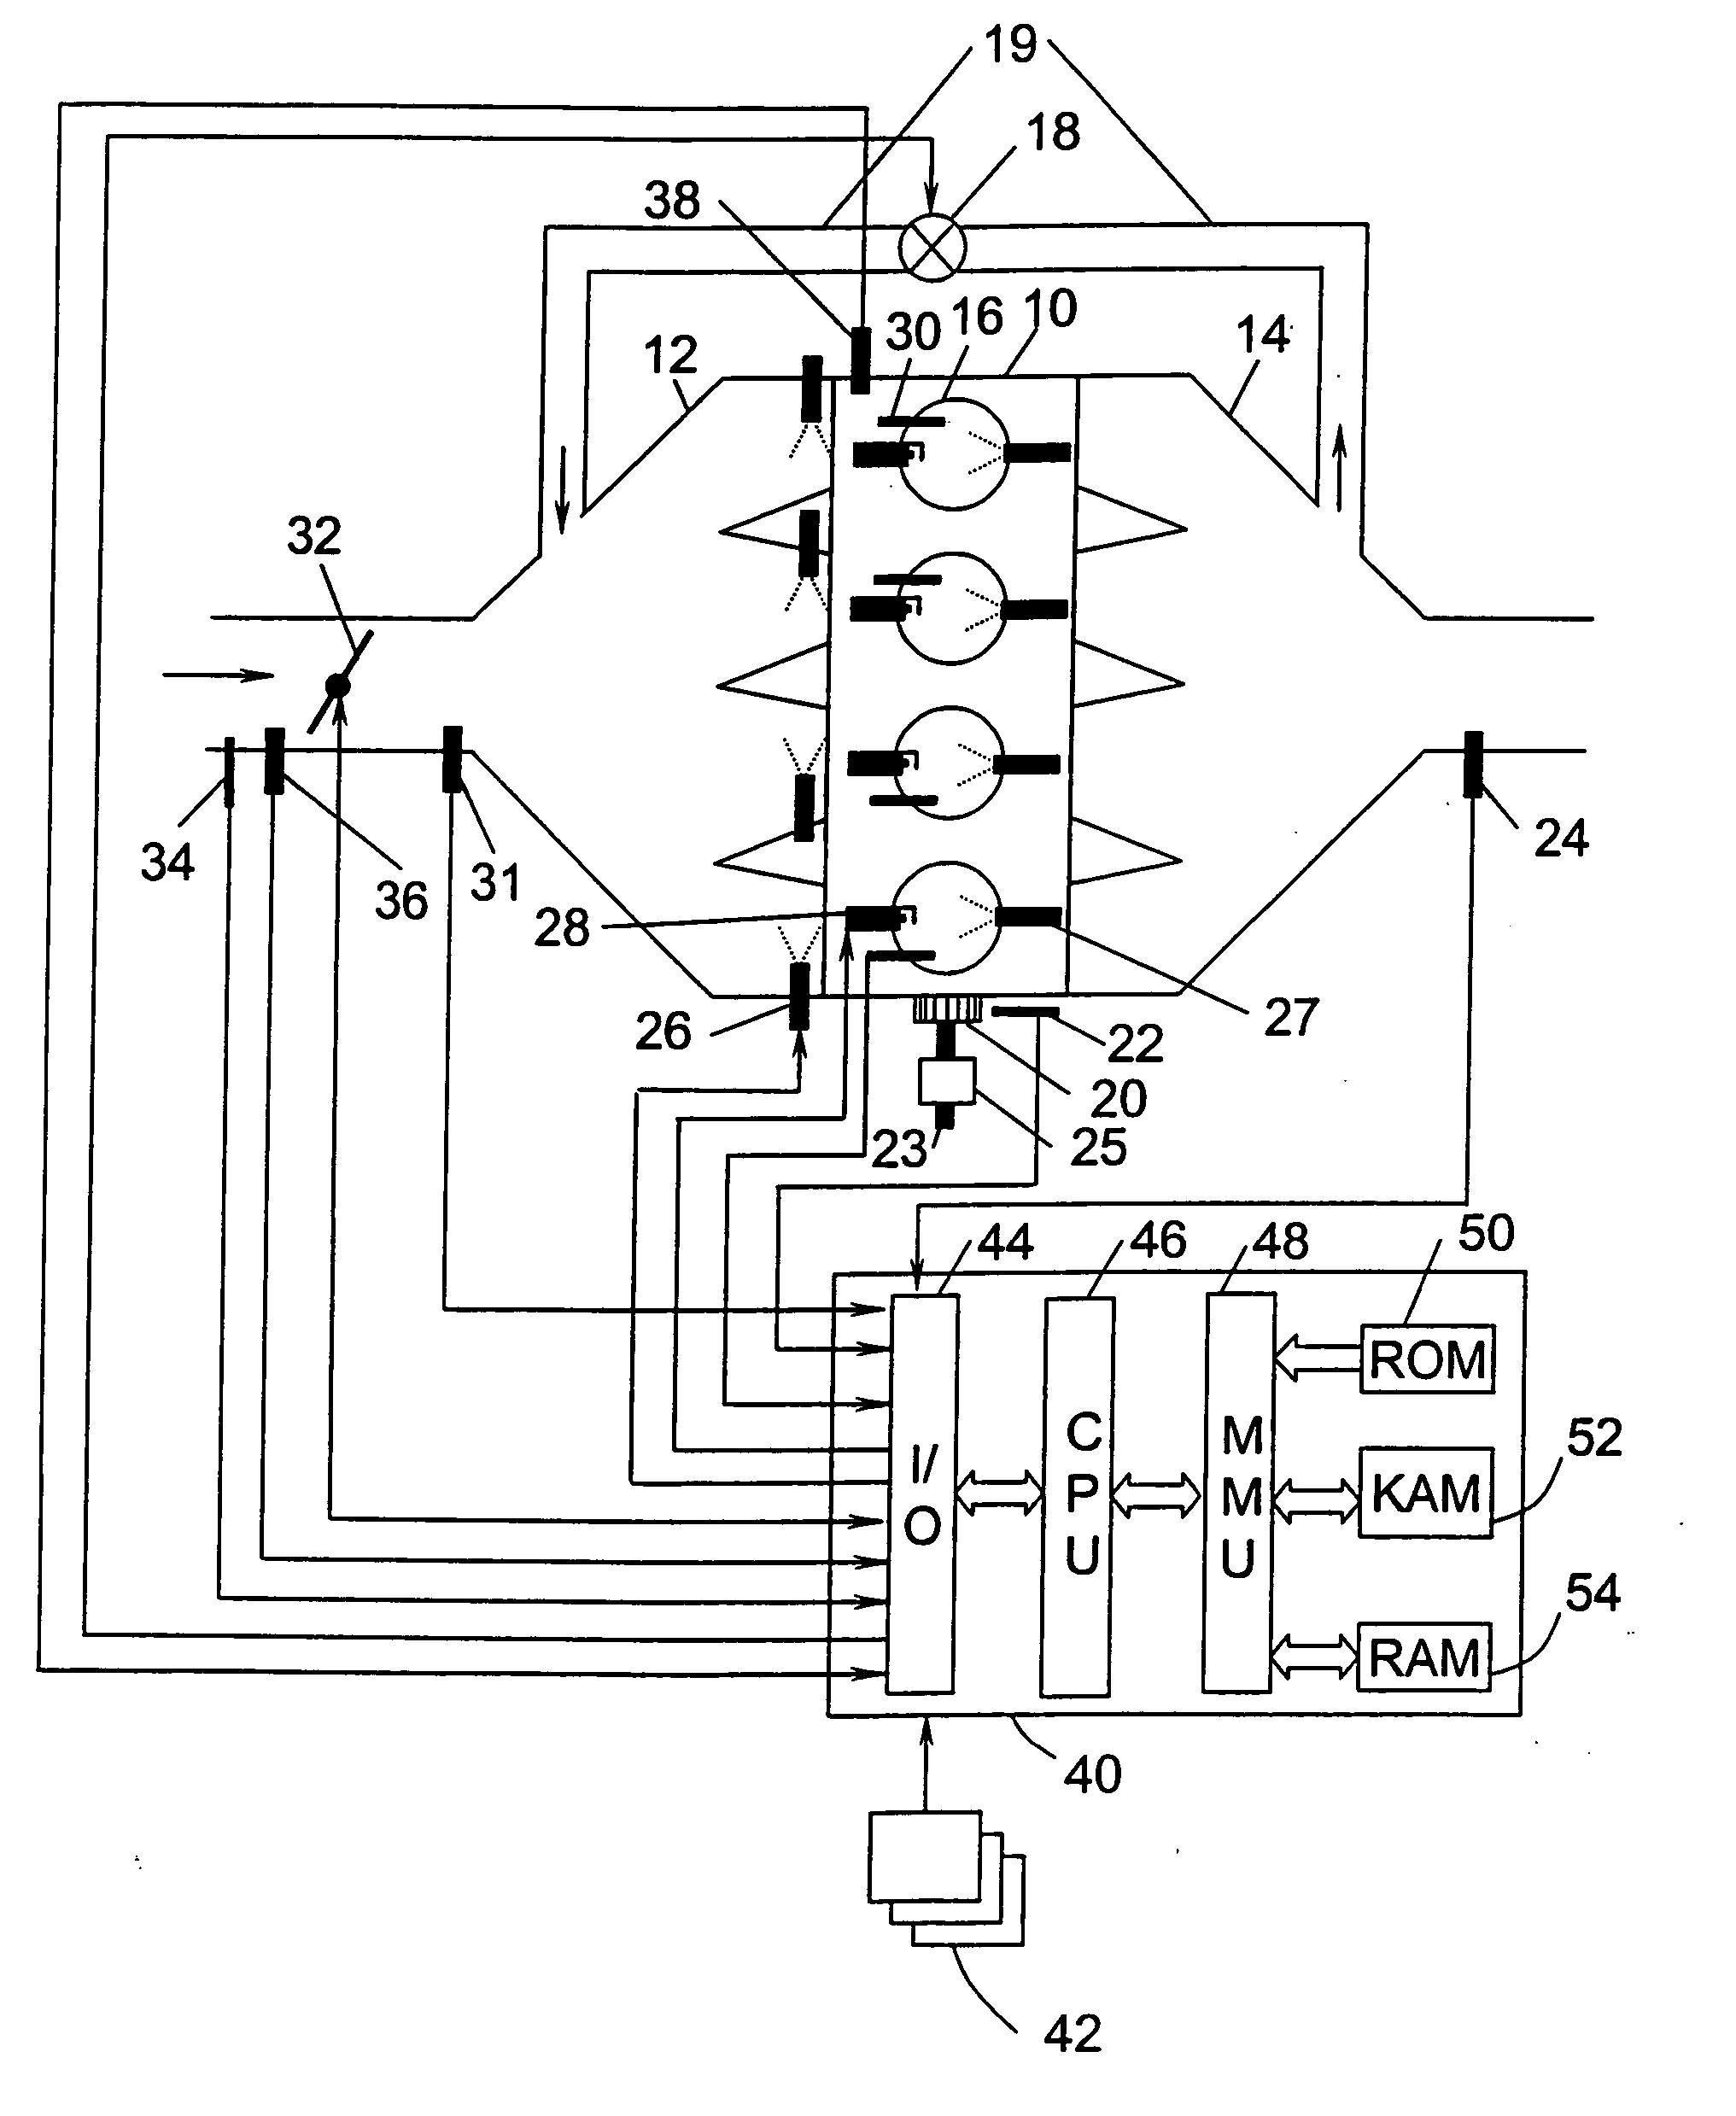 System and method to control pre-ignition in an internal combustion engine